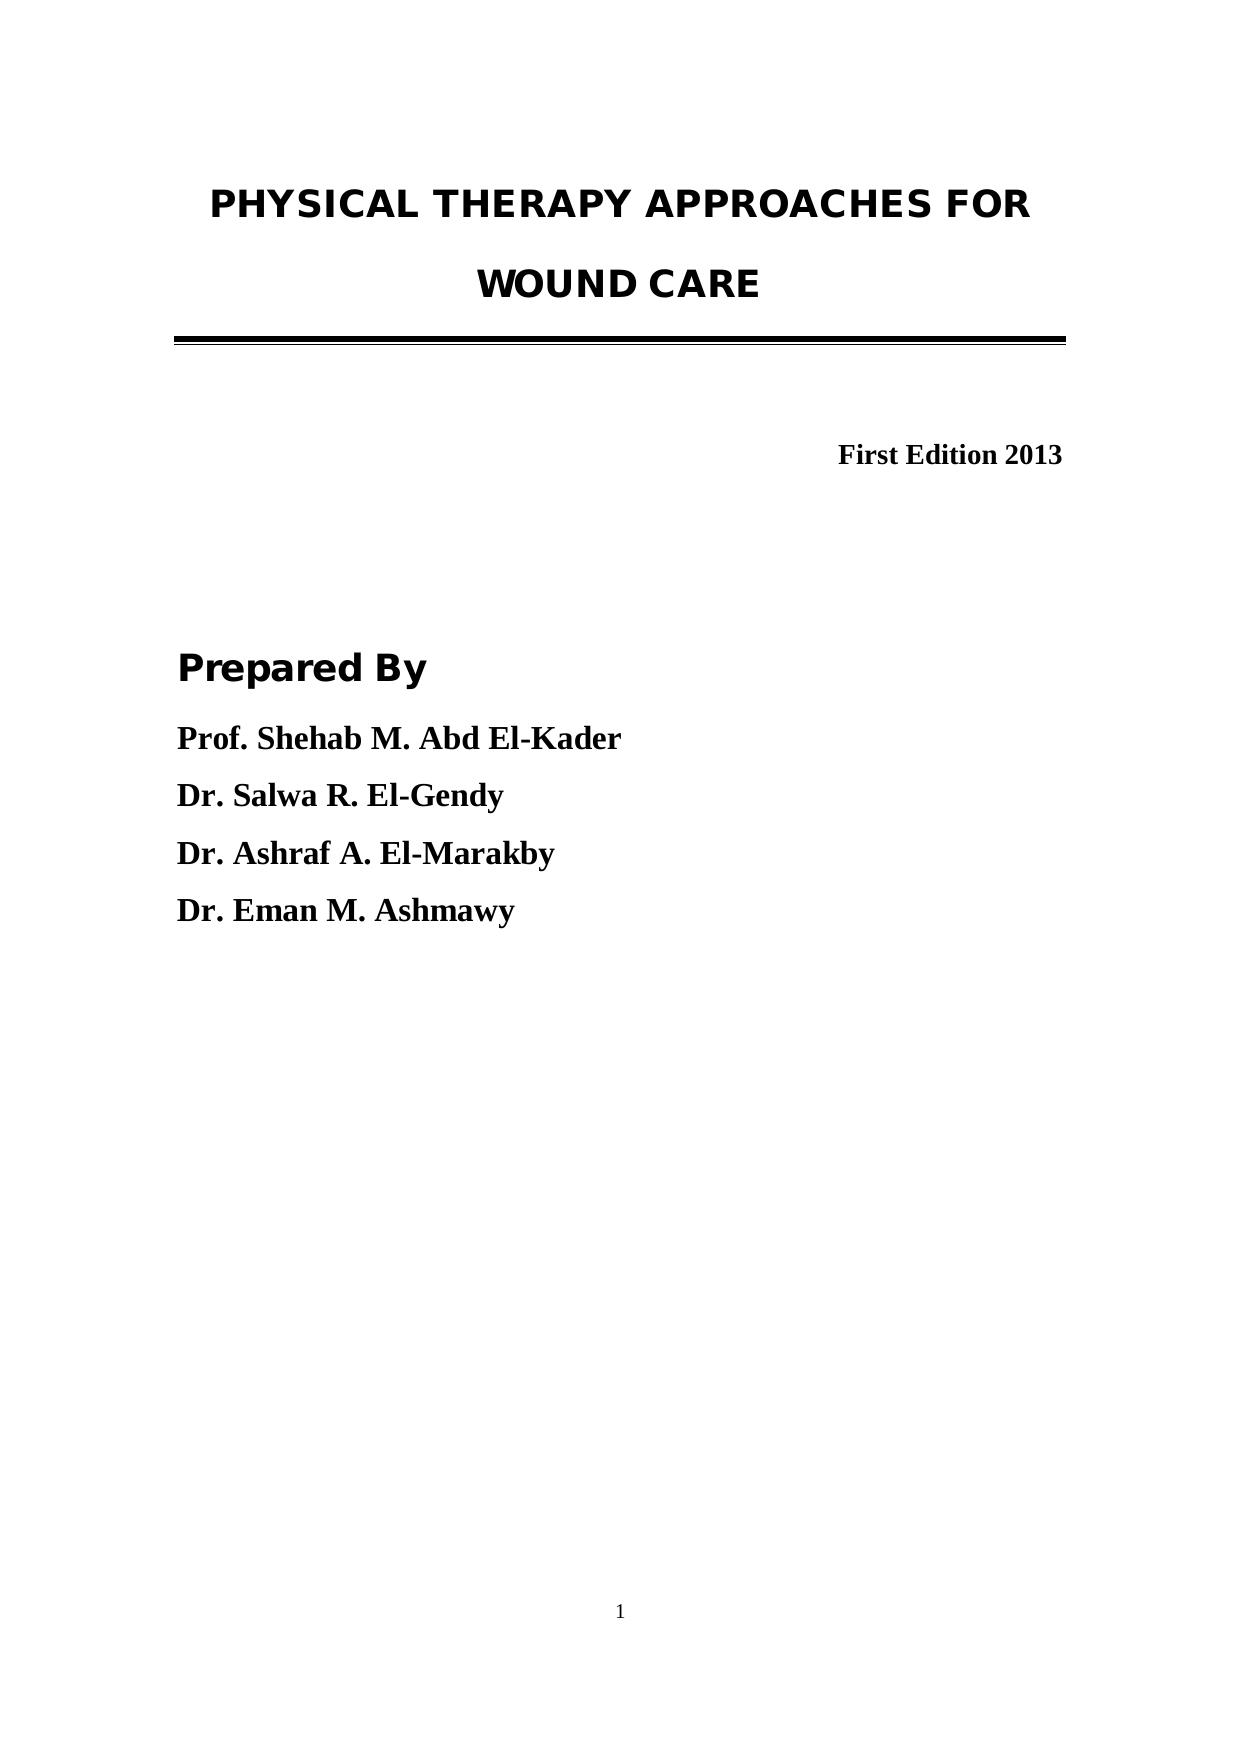 PHYSICAL THERAPY APPROACHES FOR WOUND CARE